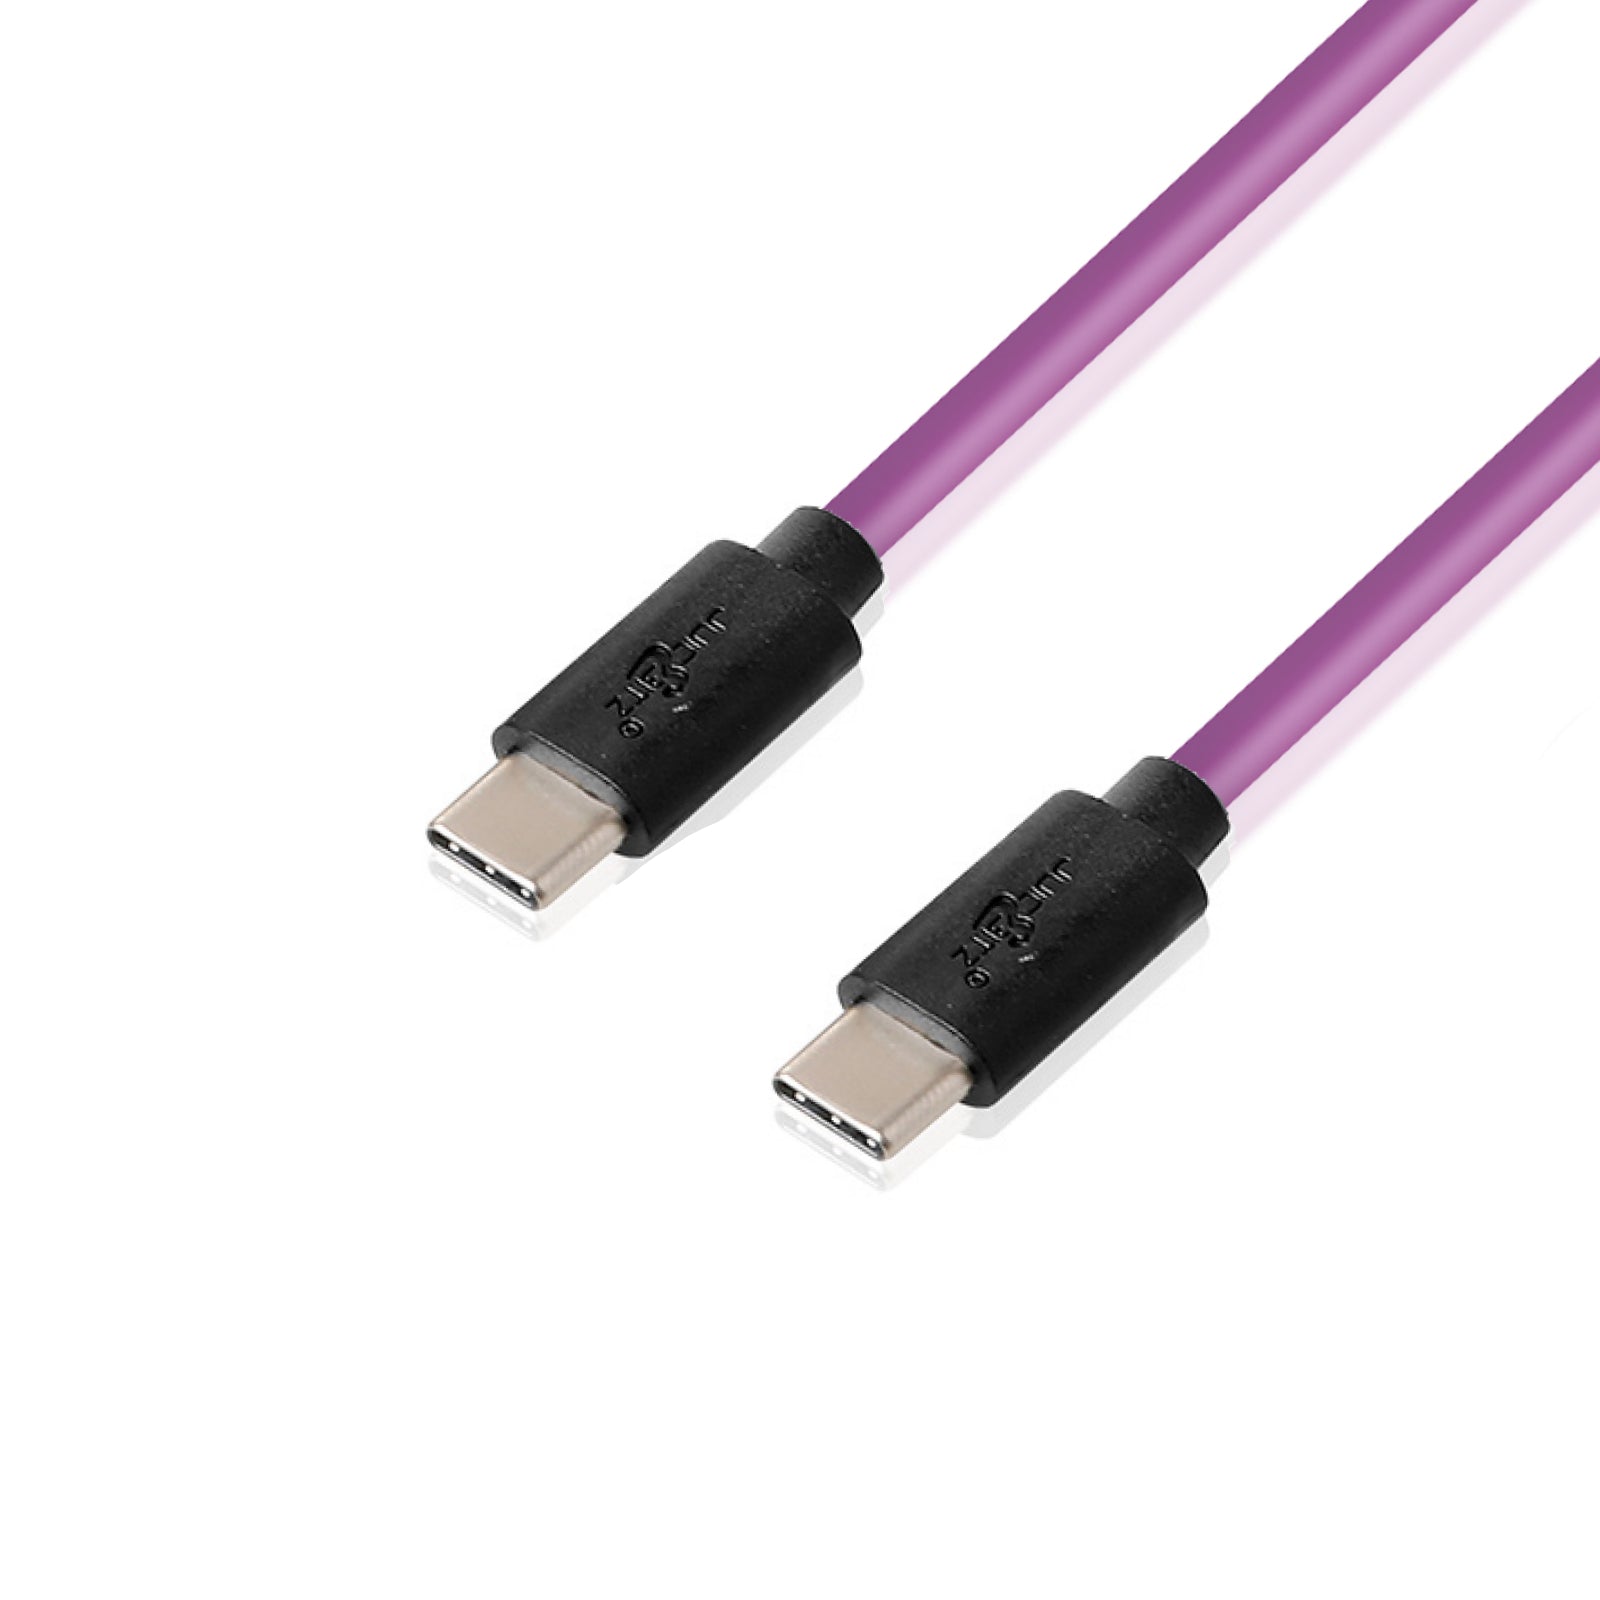 USB-C to USB-C 3A Charger Cable USB 2.0 Data Transfer Lead - Purple